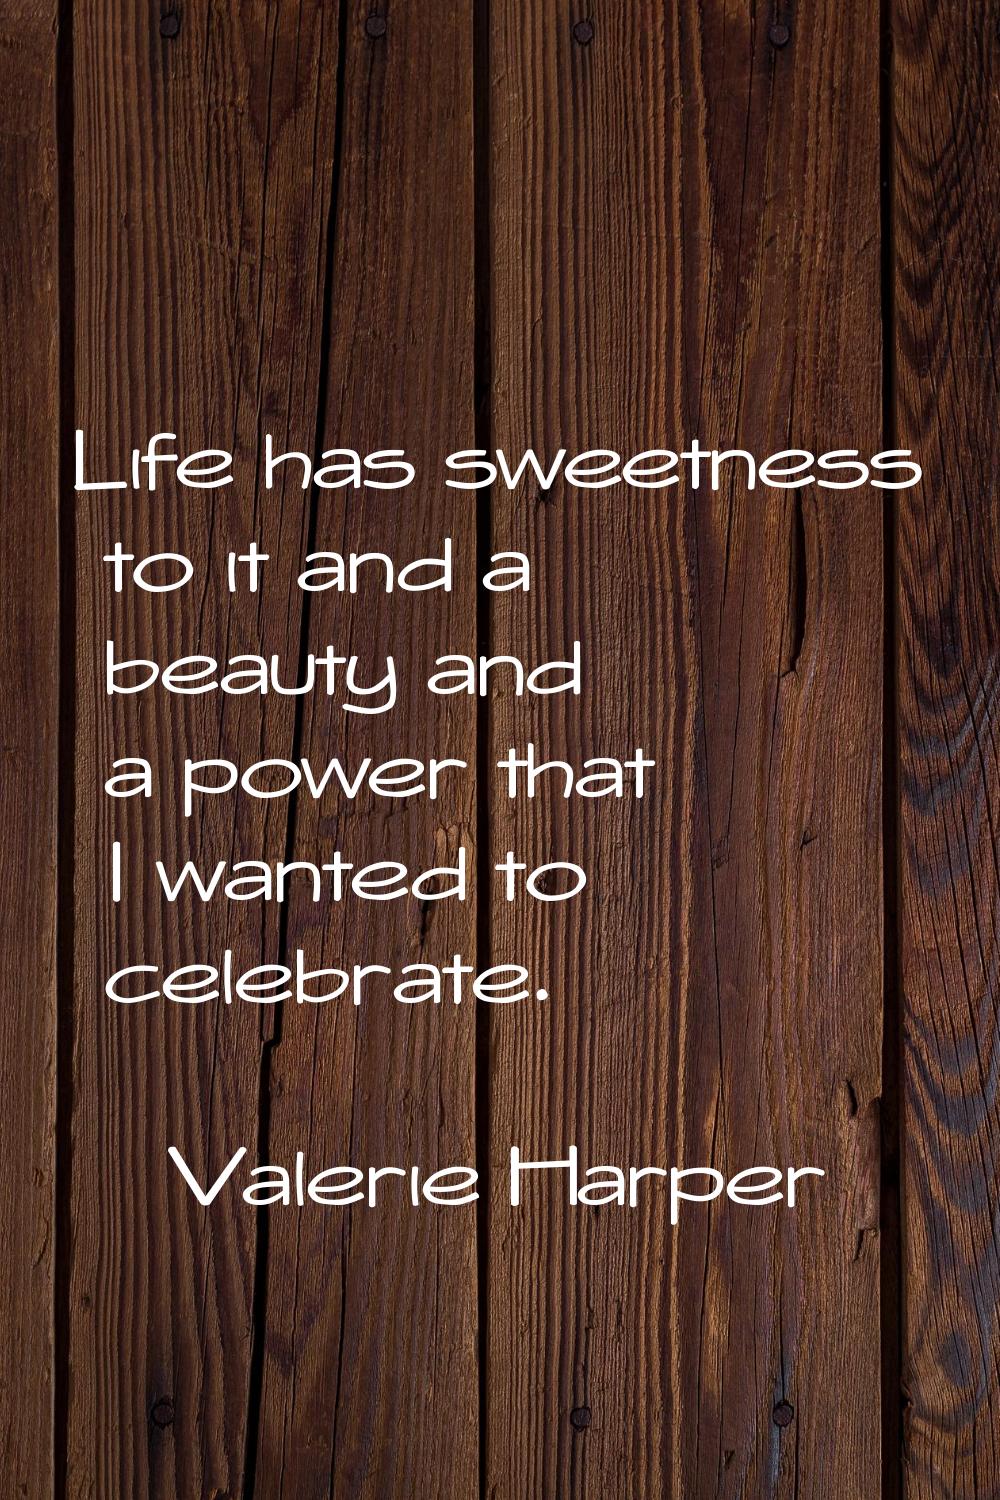 Life has sweetness to it and a beauty and a power that I wanted to celebrate.